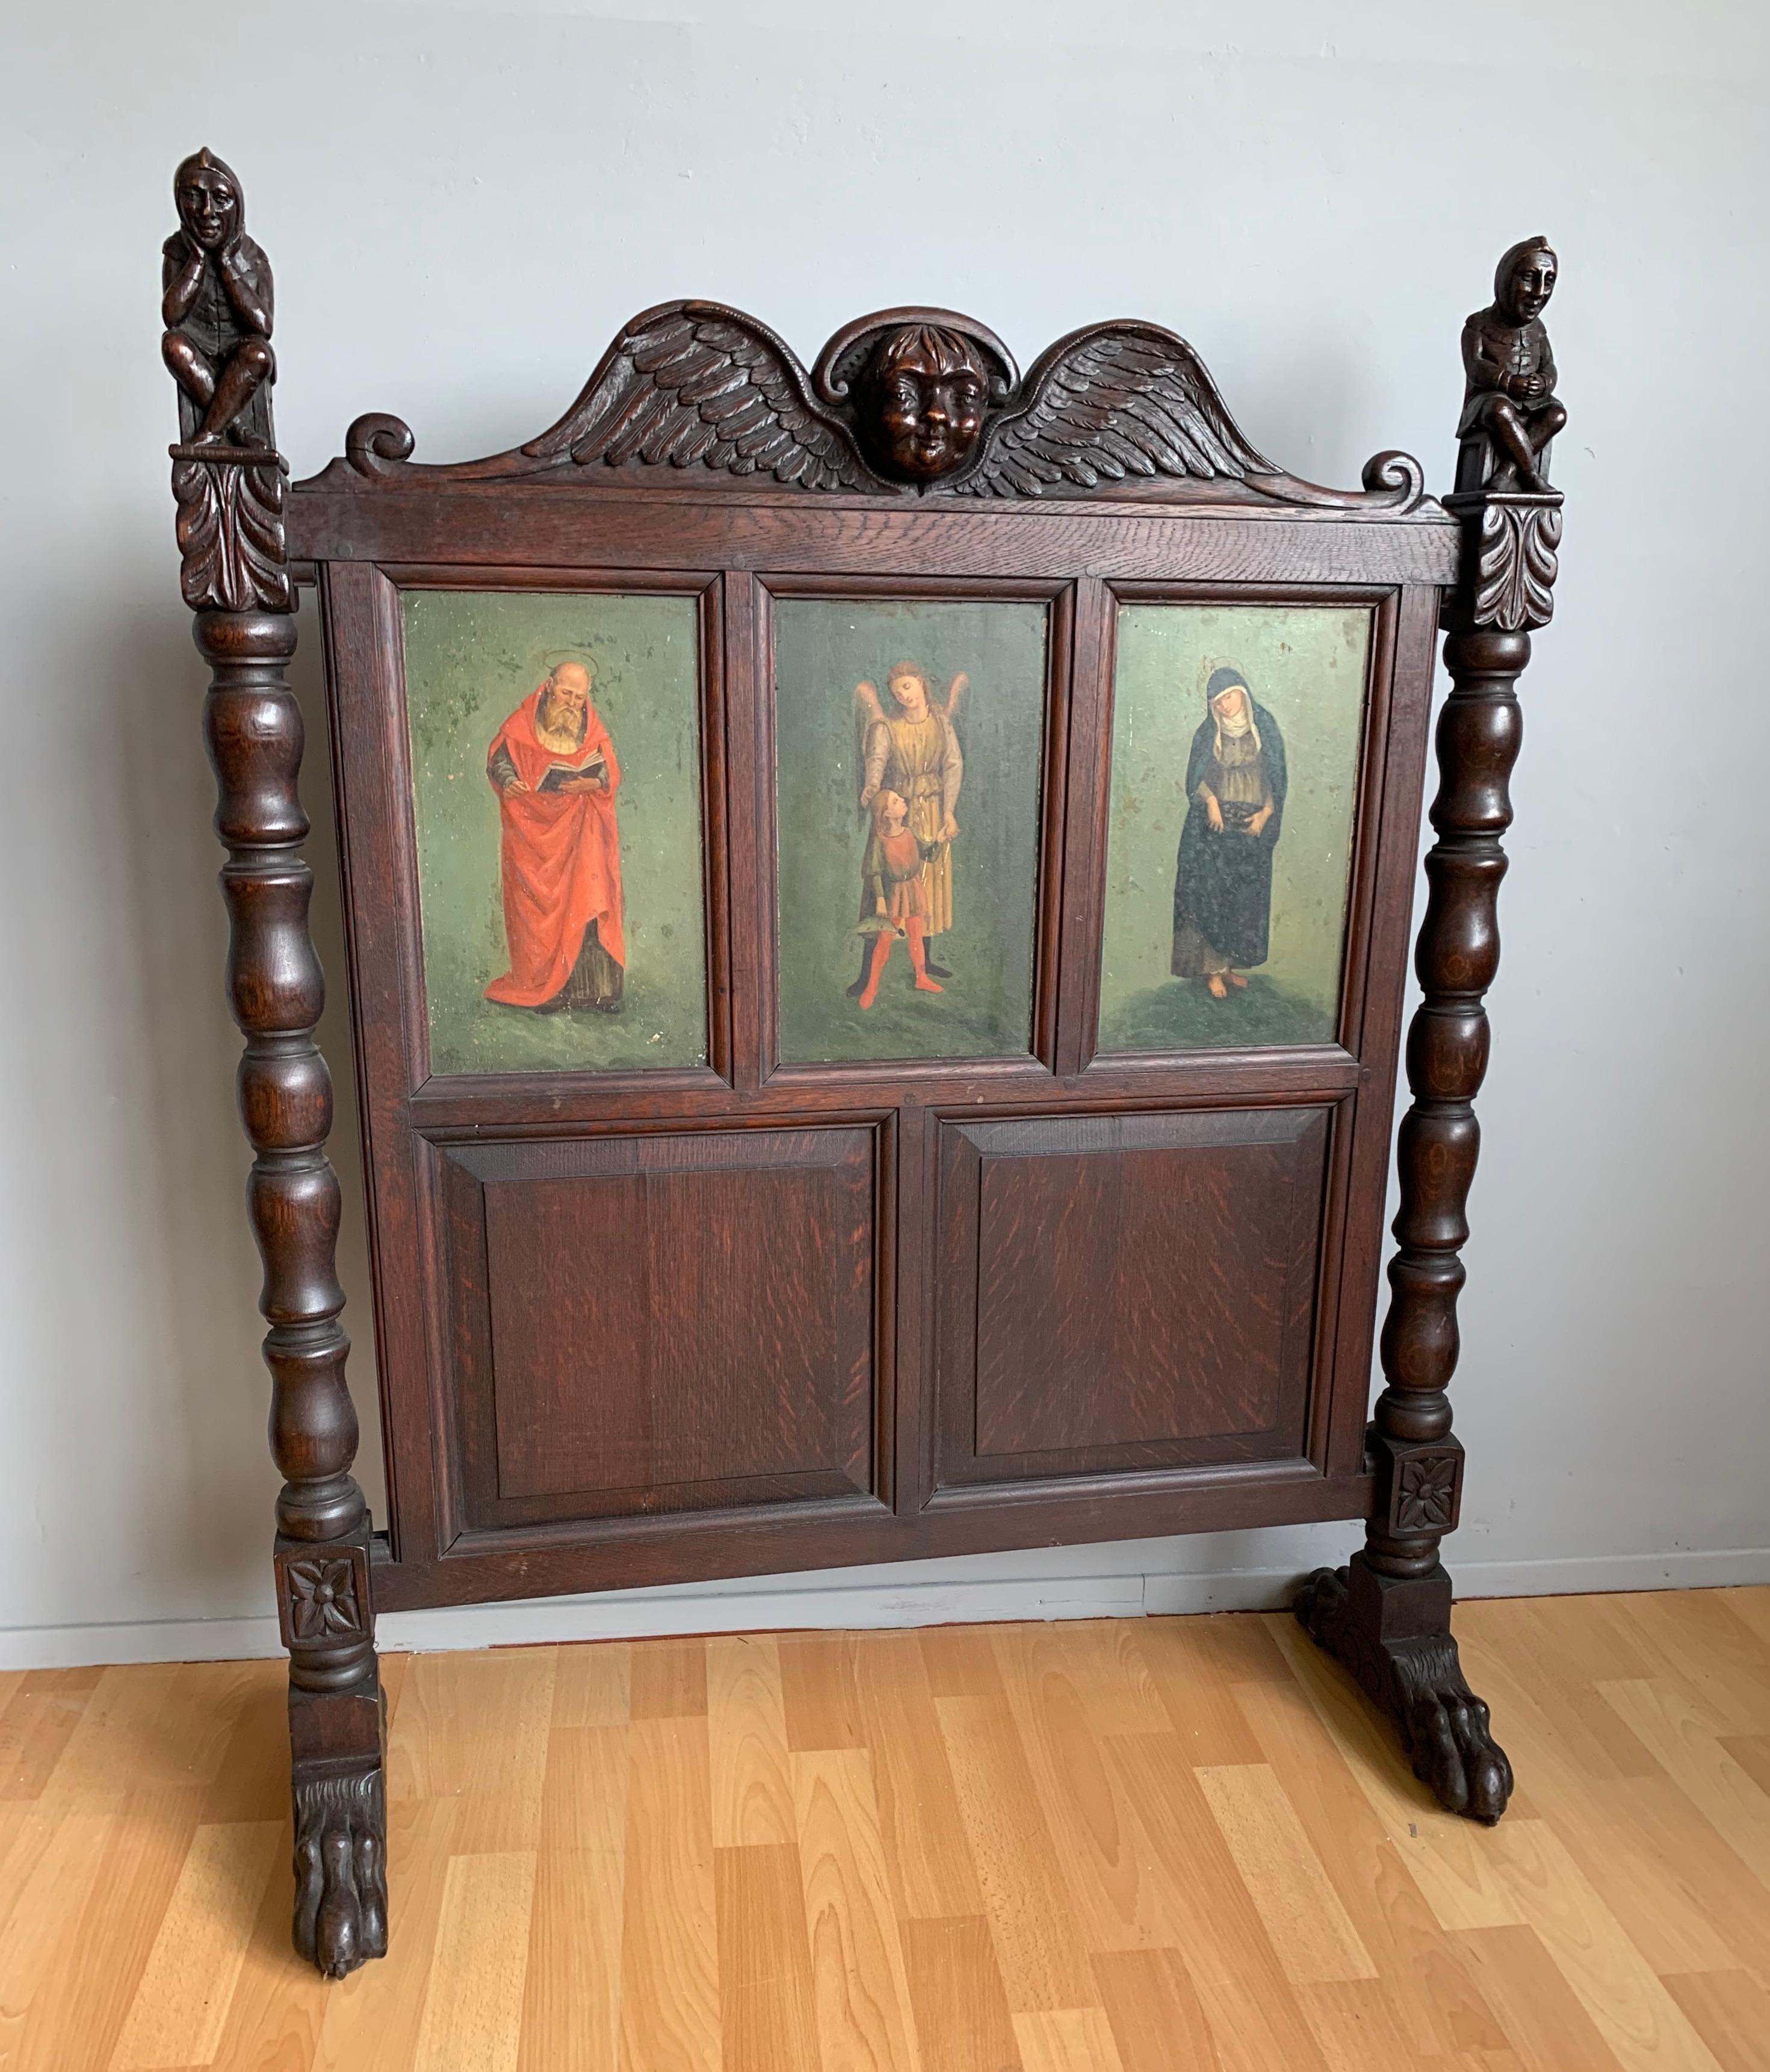 Stunning firescreen with a famous earth angle, two famous saint paintings and more.

With meaningful 'religious art' from centuries-past being one of our specialities we were amazed, not only to find this rare and marvelous fire screen, but also